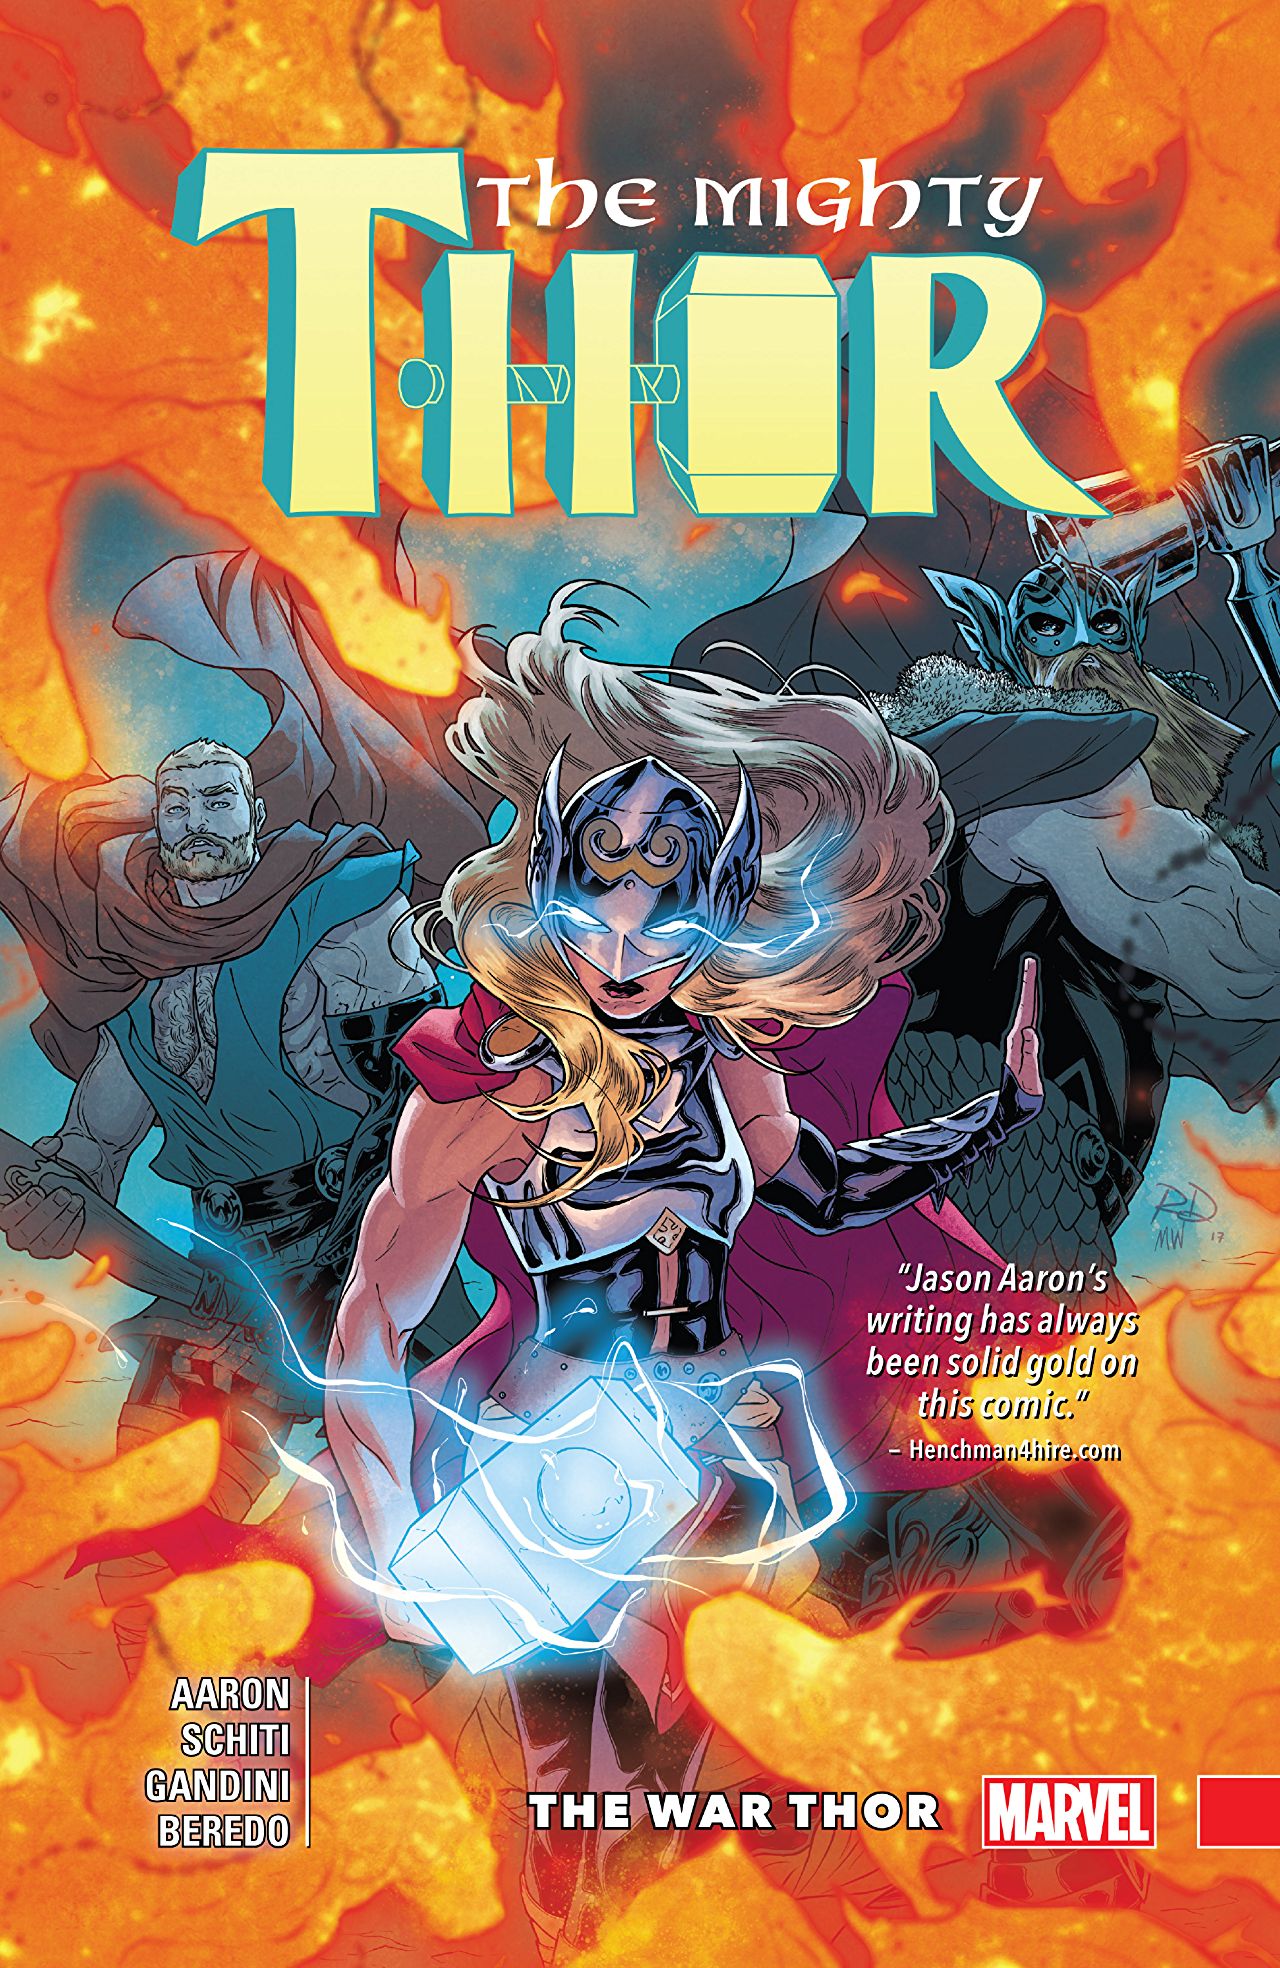 The Mighty Thor Volume 4: The War Thor Review